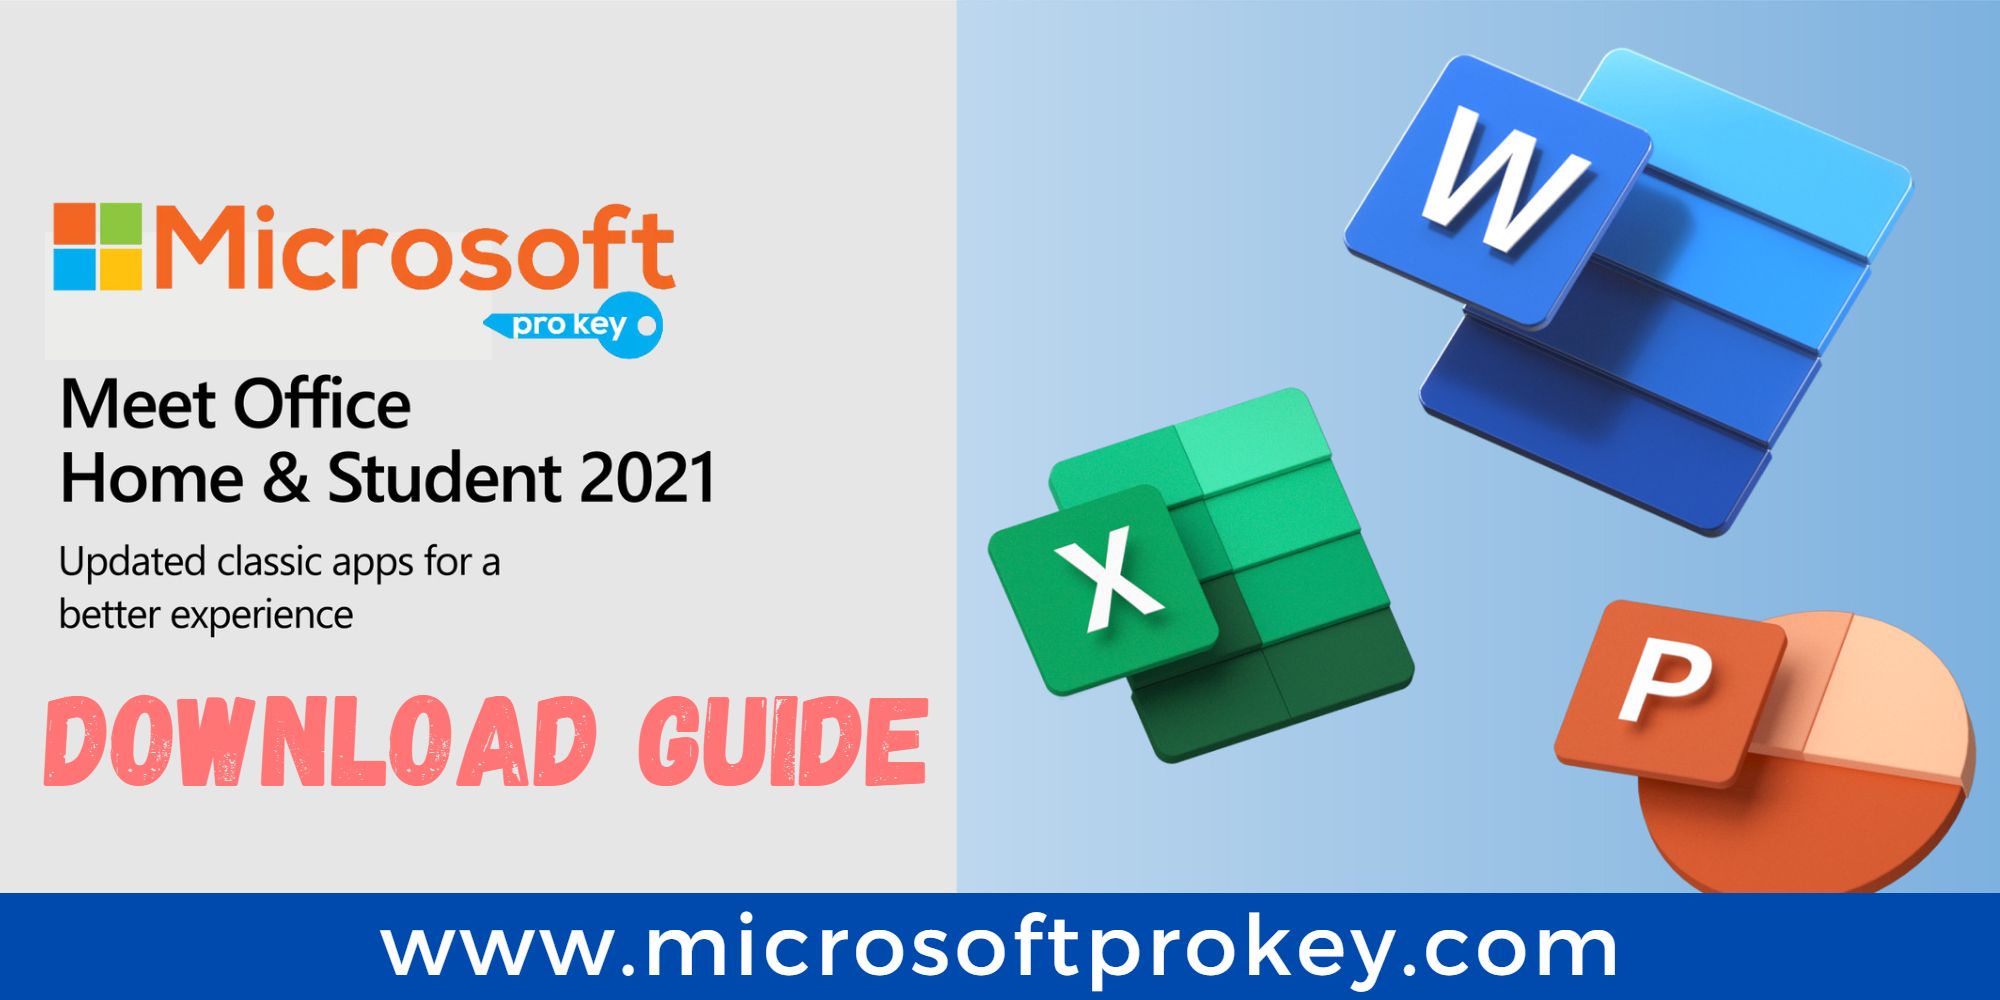 Microsoft Office 2021 Home & Student Download Guide